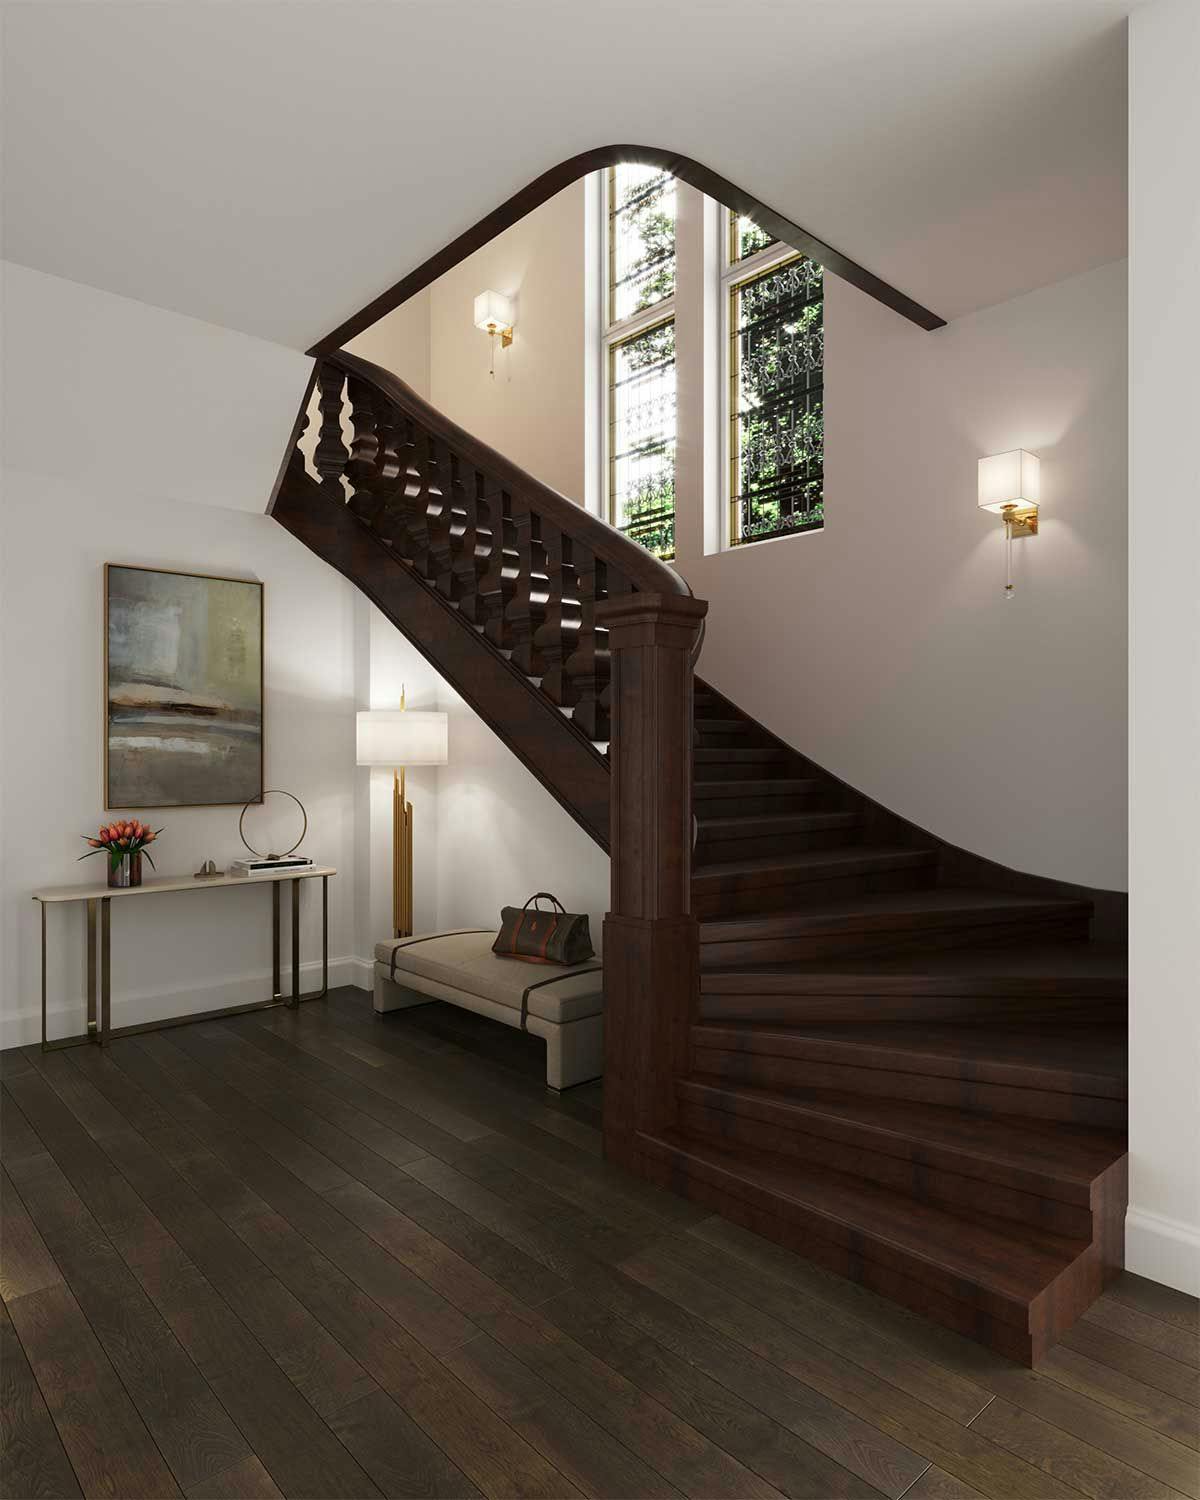 3D Interior Visualization with the design concept of an entrance hallway of the historical property in Berlin